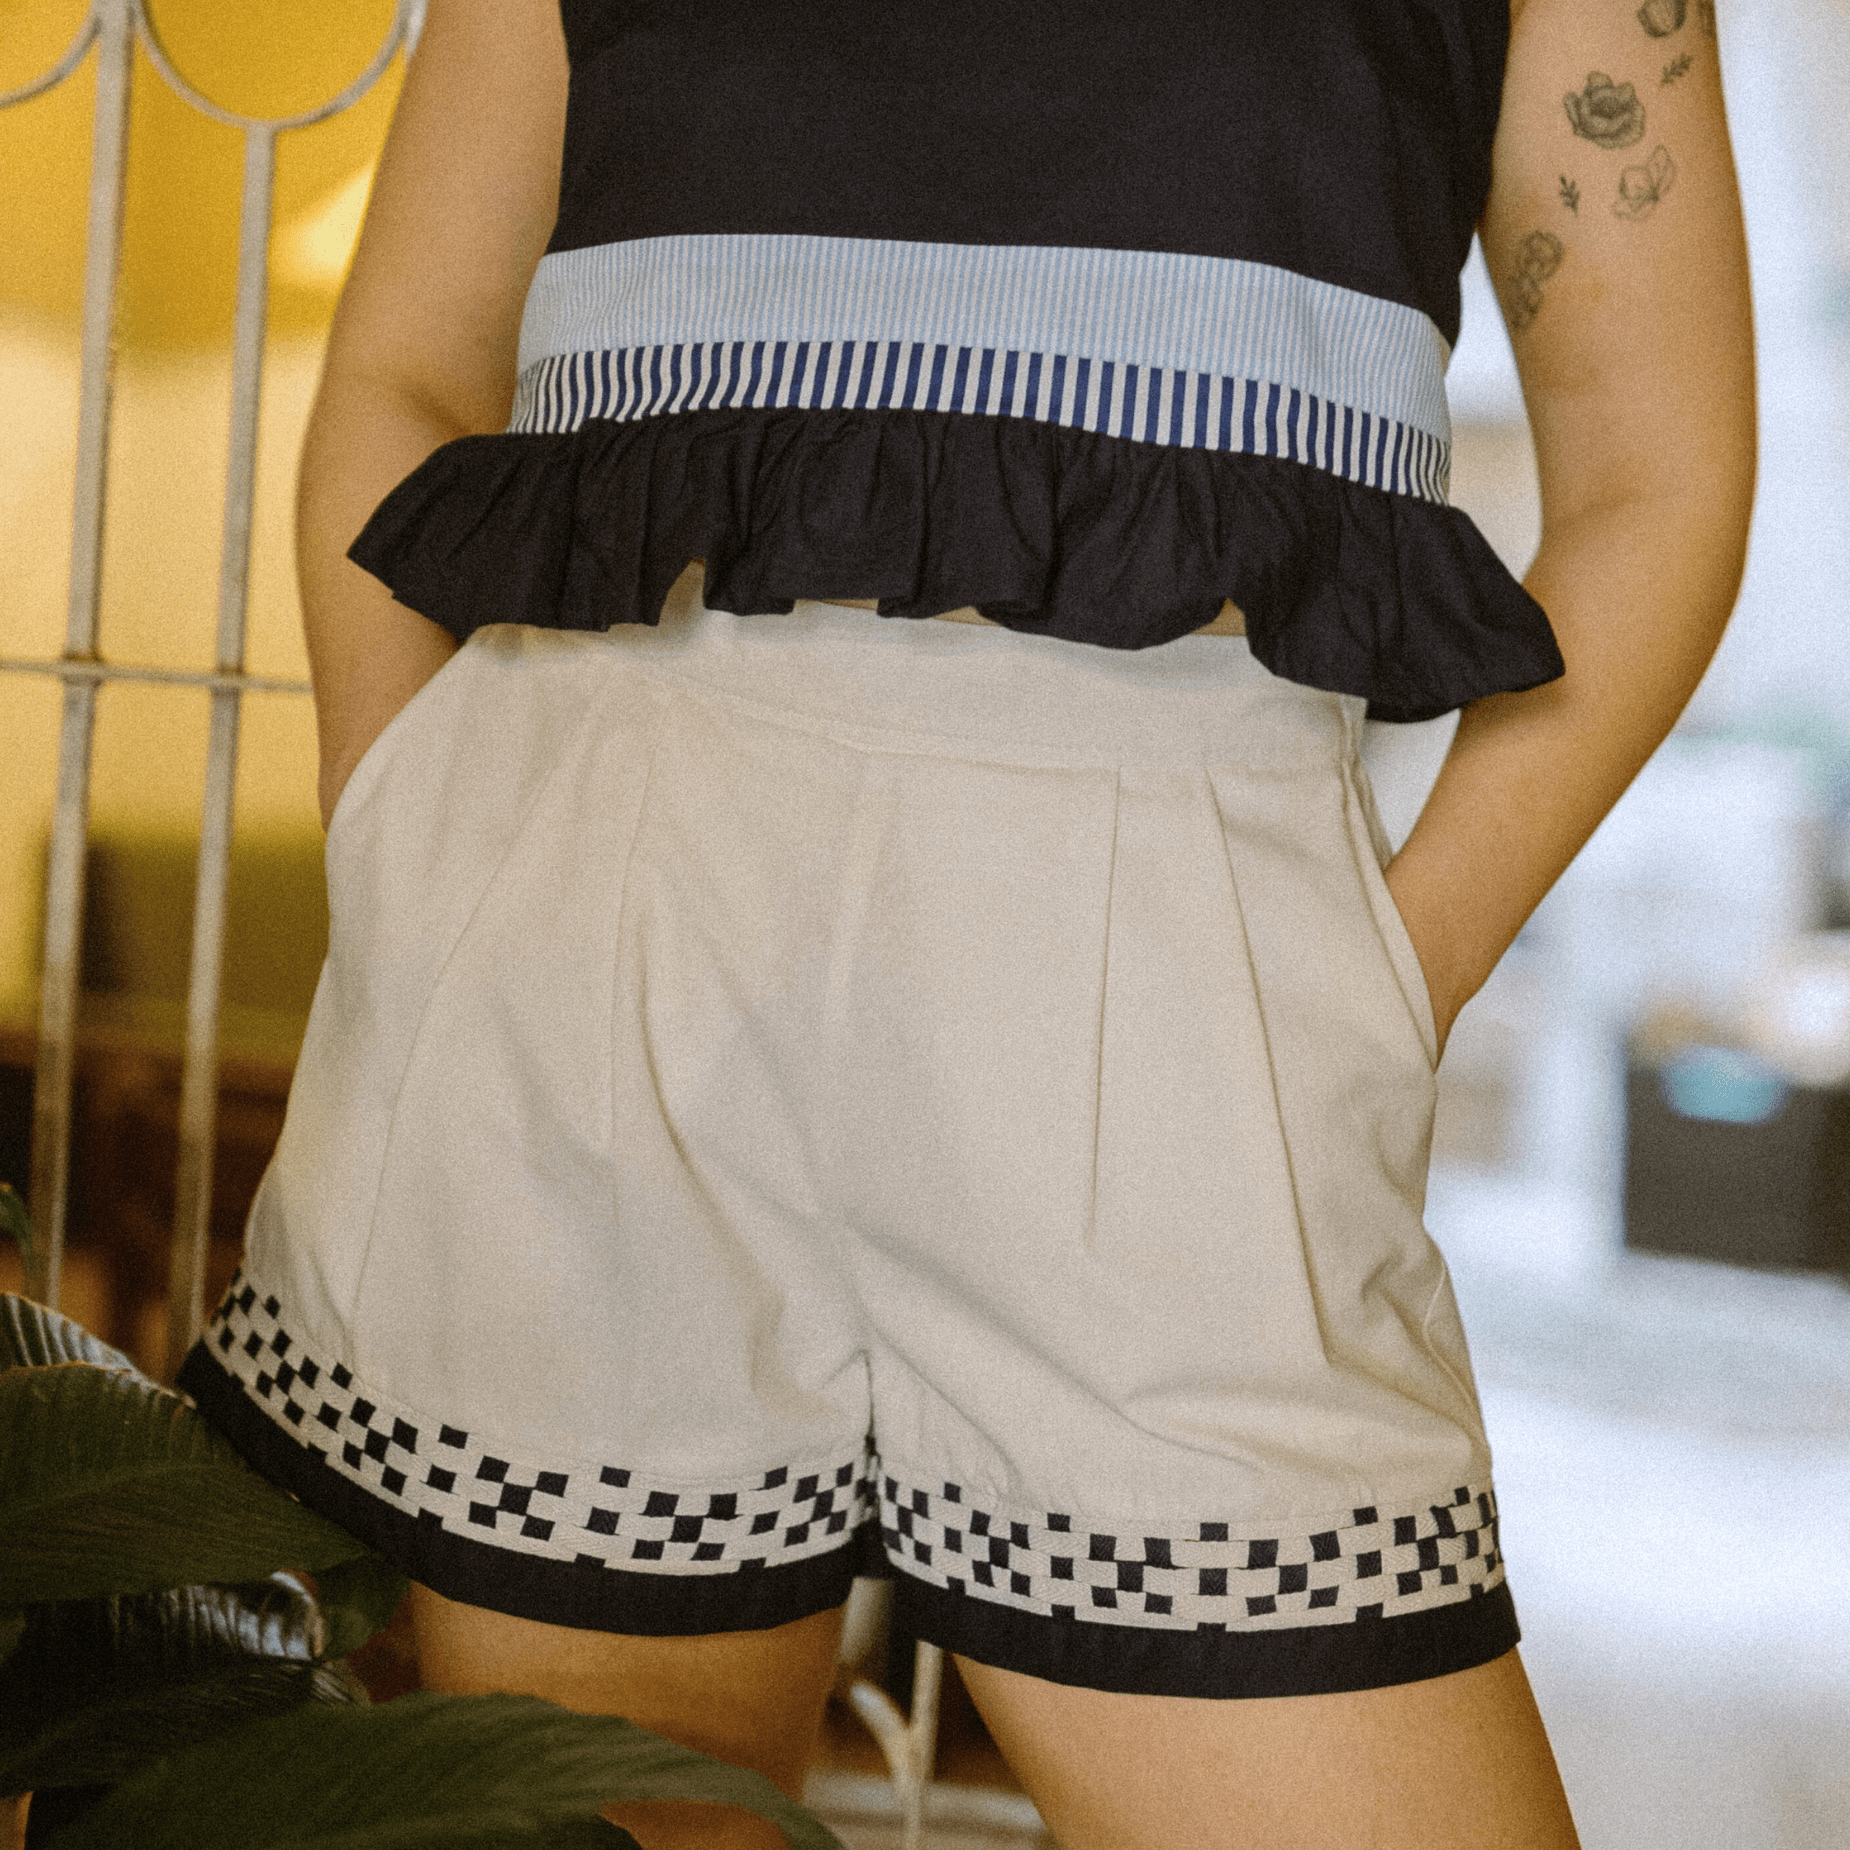 Dito at Doon Shorts Navy & White Fashion Rags2Riches